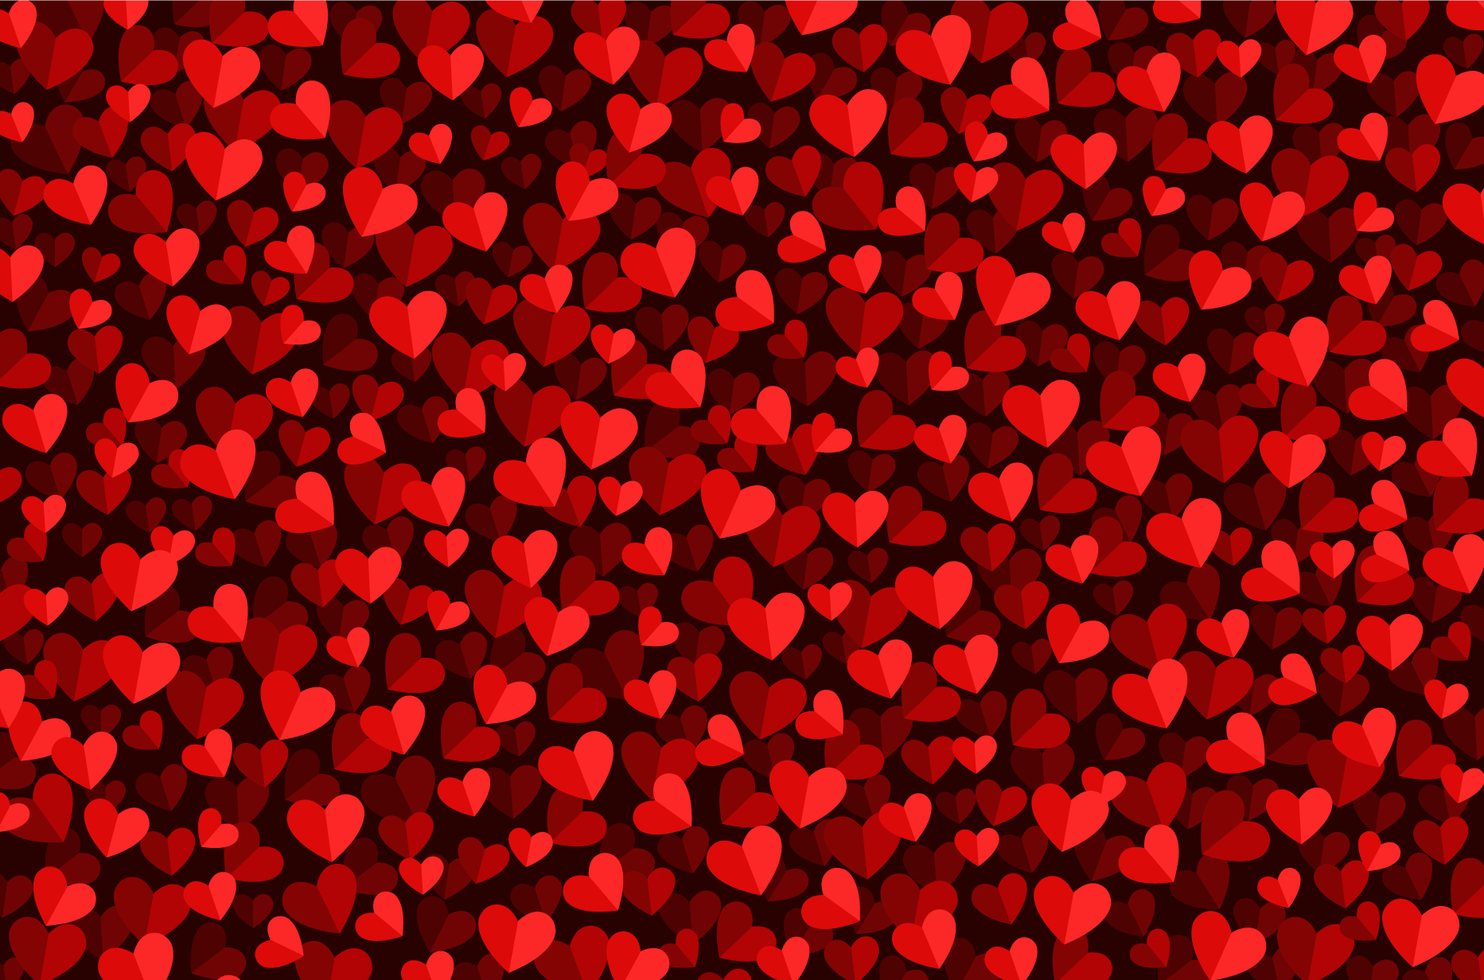 Valentine's day red hearts background vector